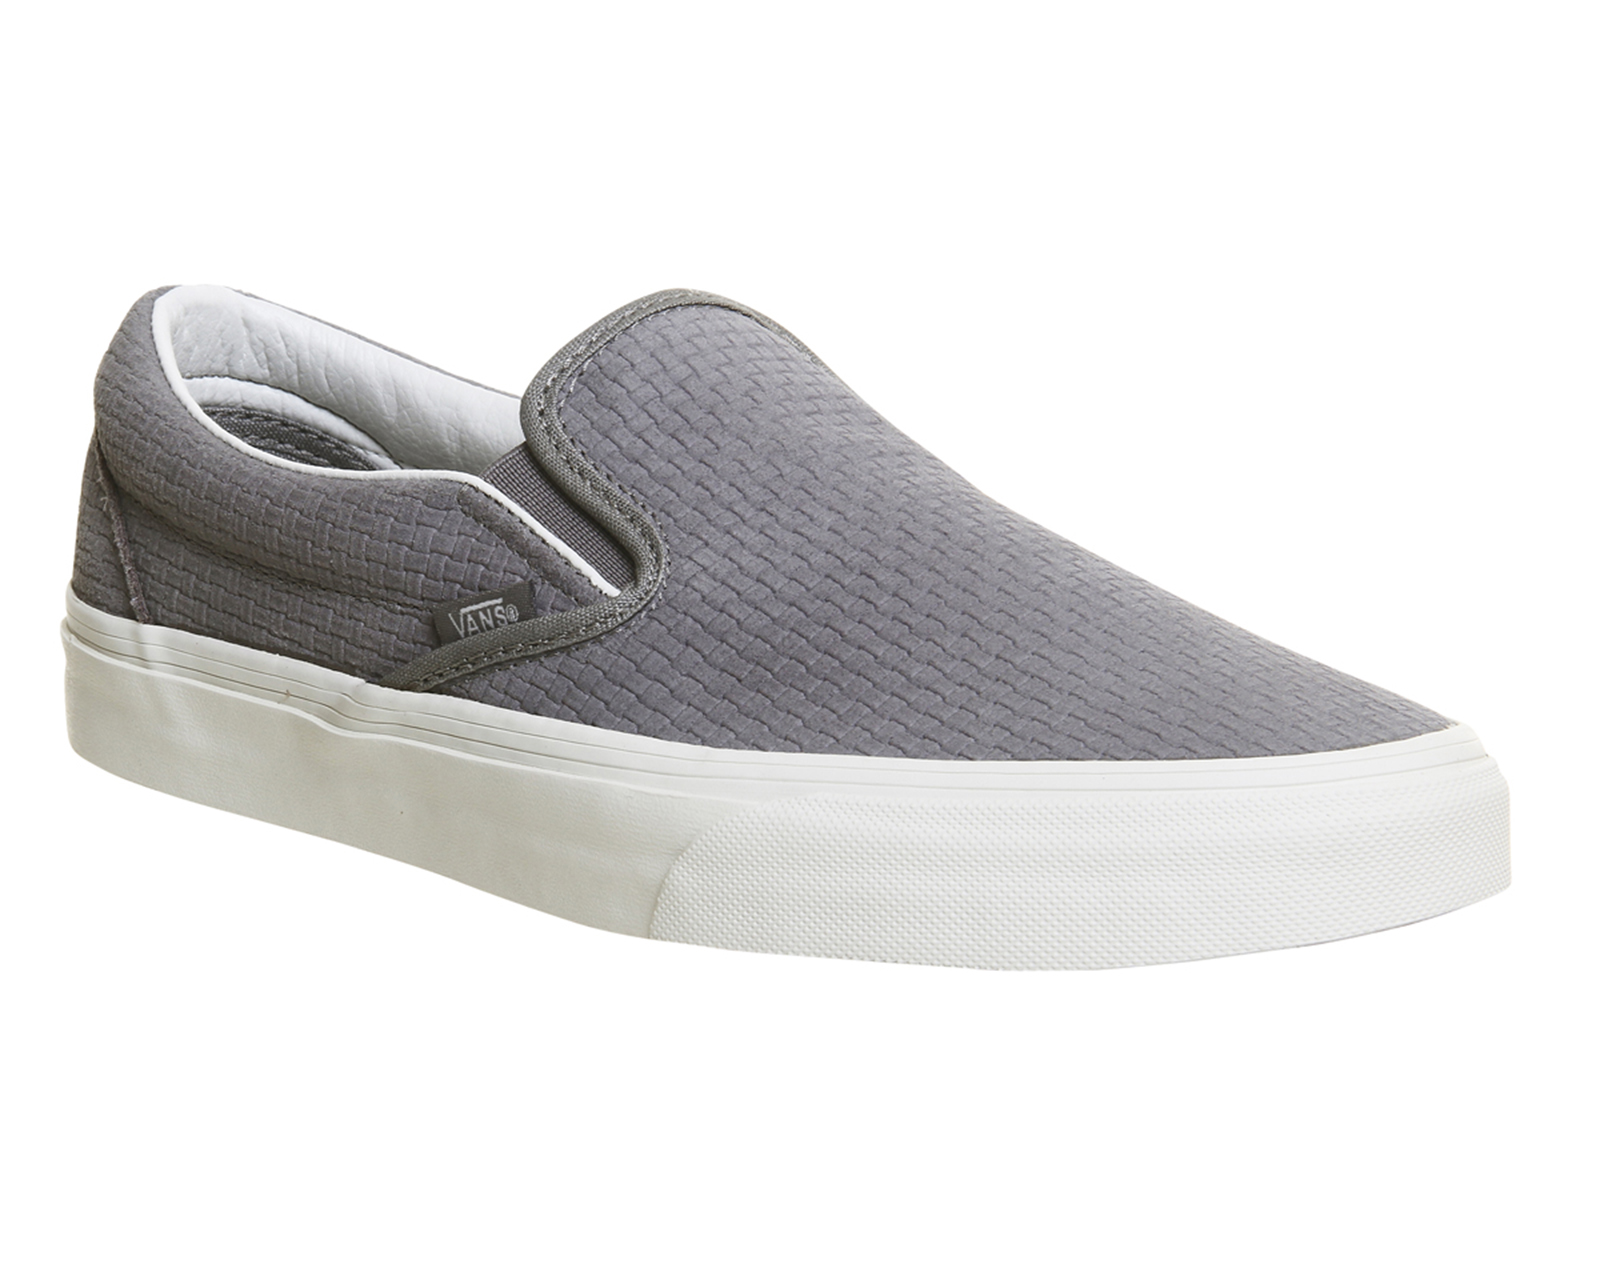 Get - vans slip on dove grey - OFF 61% - Getting free delivery on the  things you buy every day - www.armaosgb.com.tr